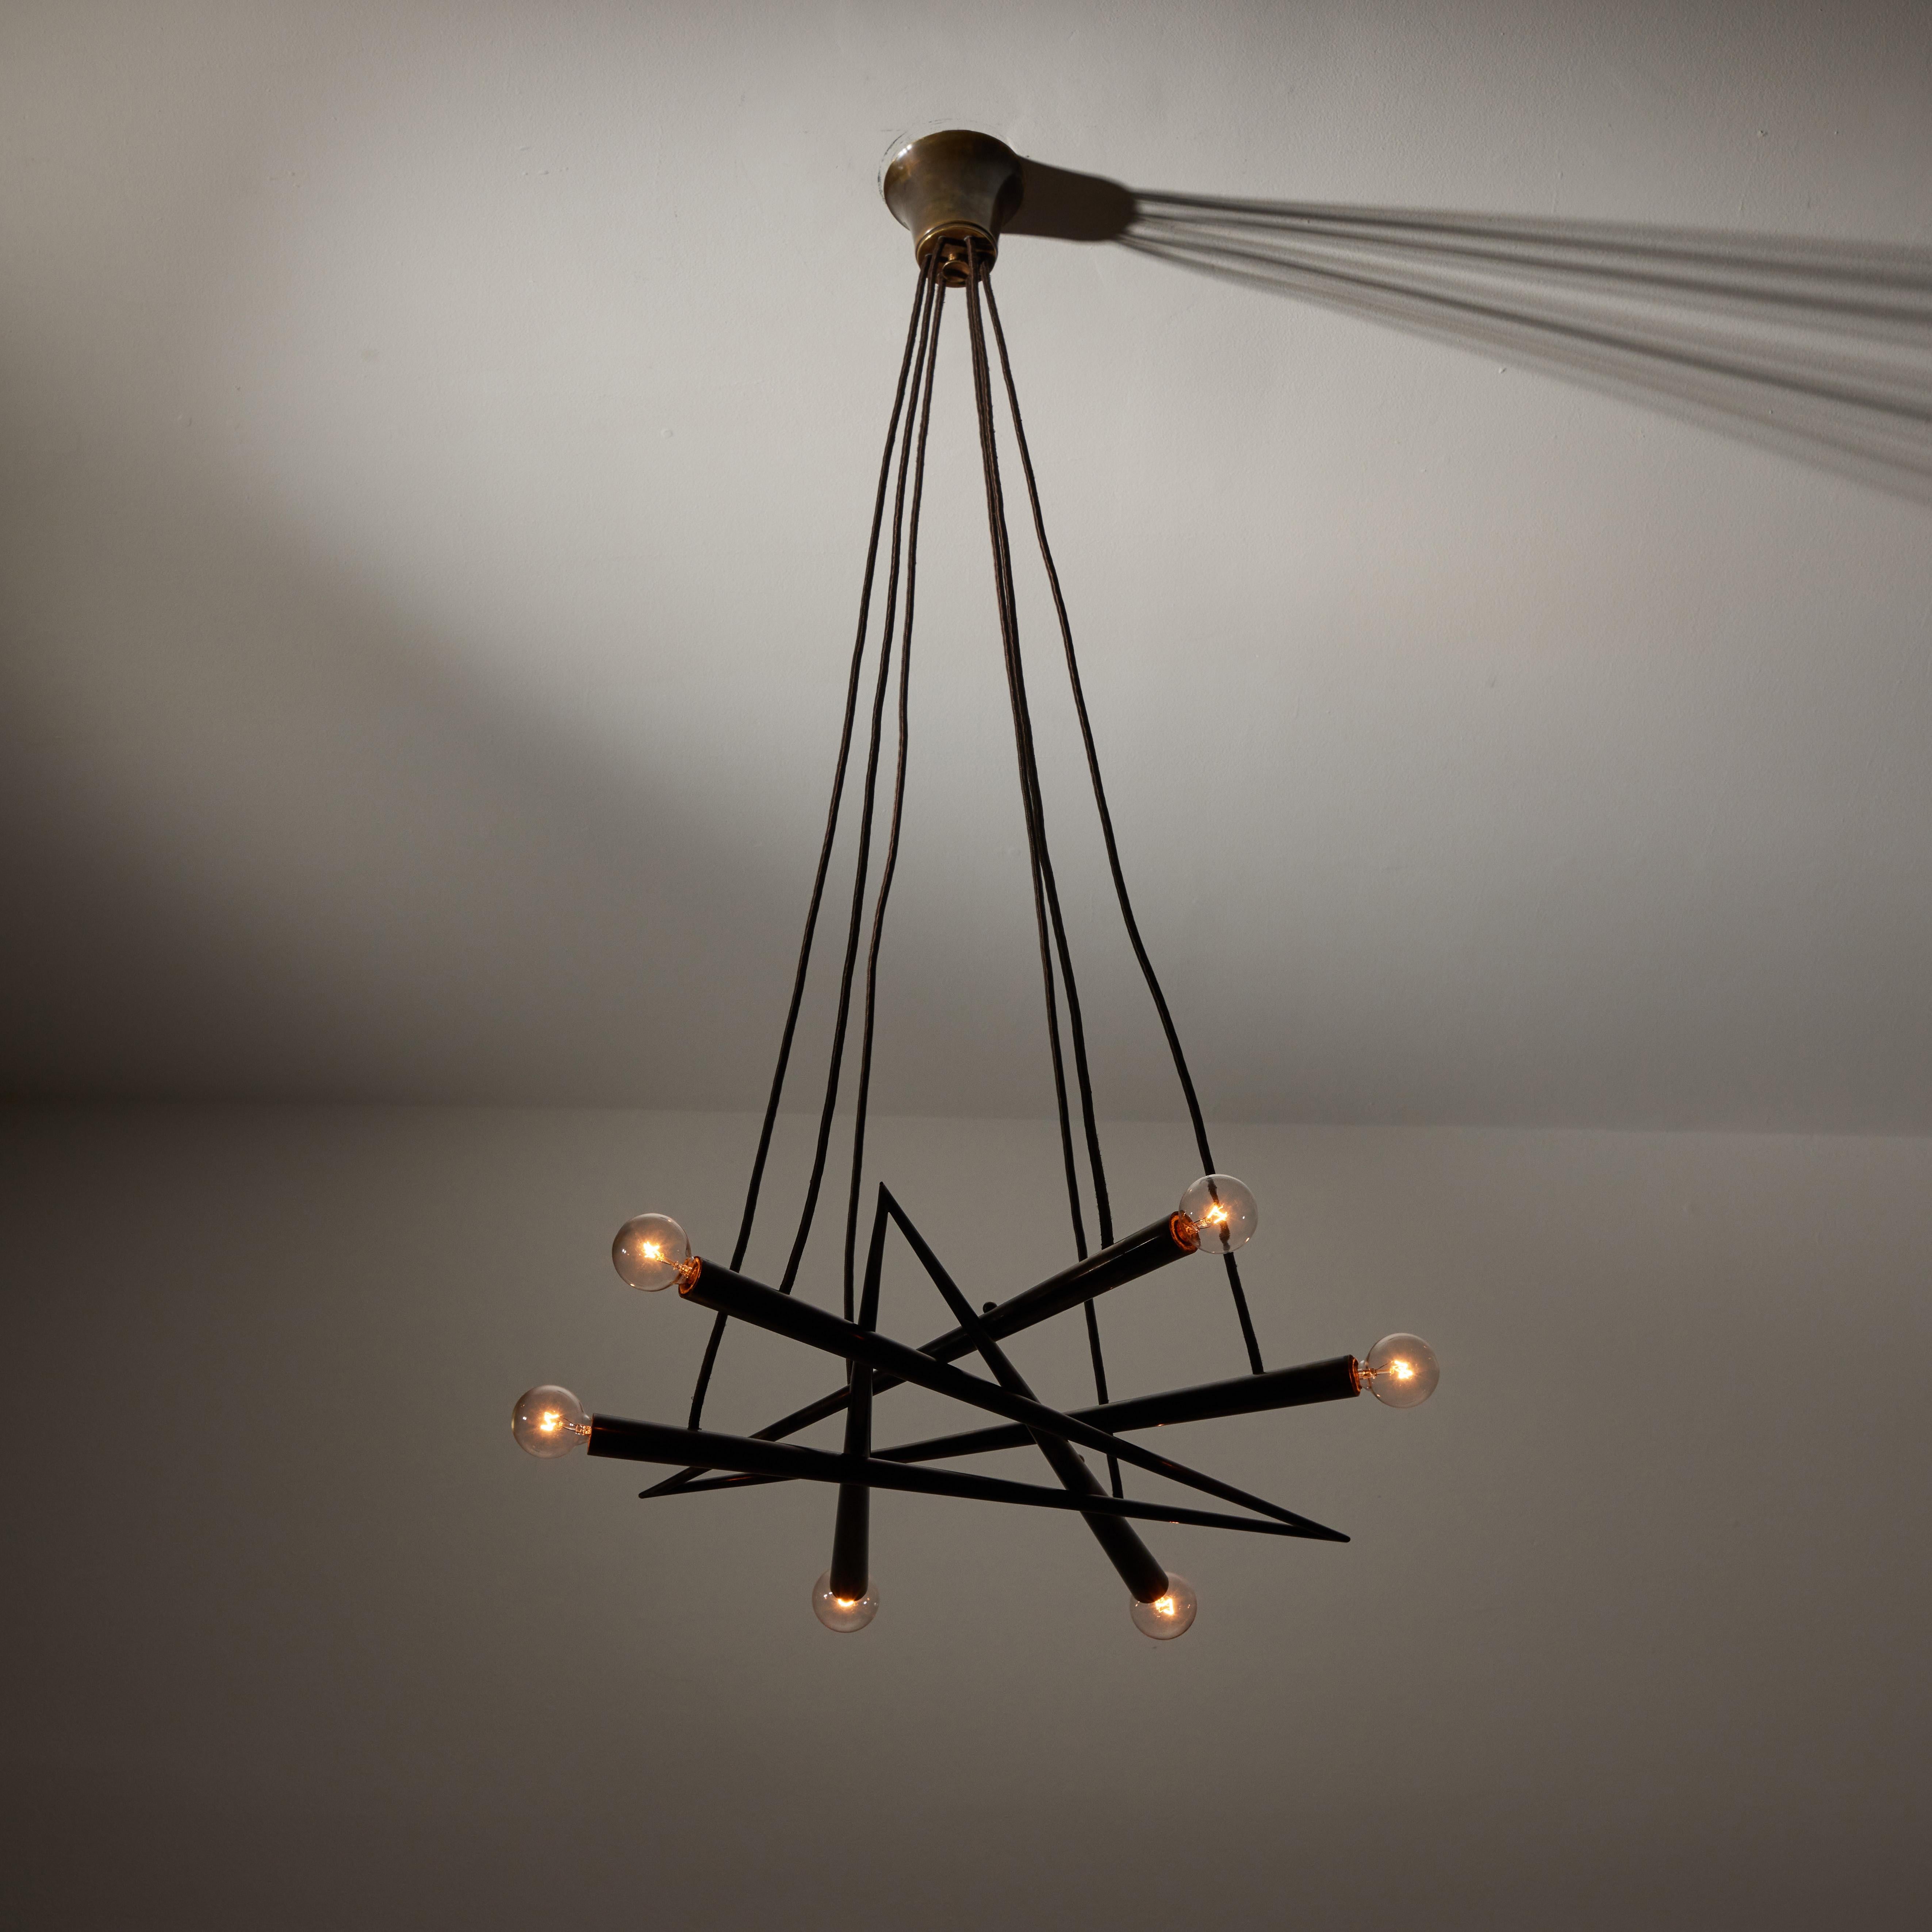 Suspension Light by Stilnovo. Manufactured in Italy, circa 1950's. Brass, original canopy, custom brass ceiling plate. Wired for U.S. standards. We recommend six E14 40w maximum candelabra bulbs. Bulbs not included.